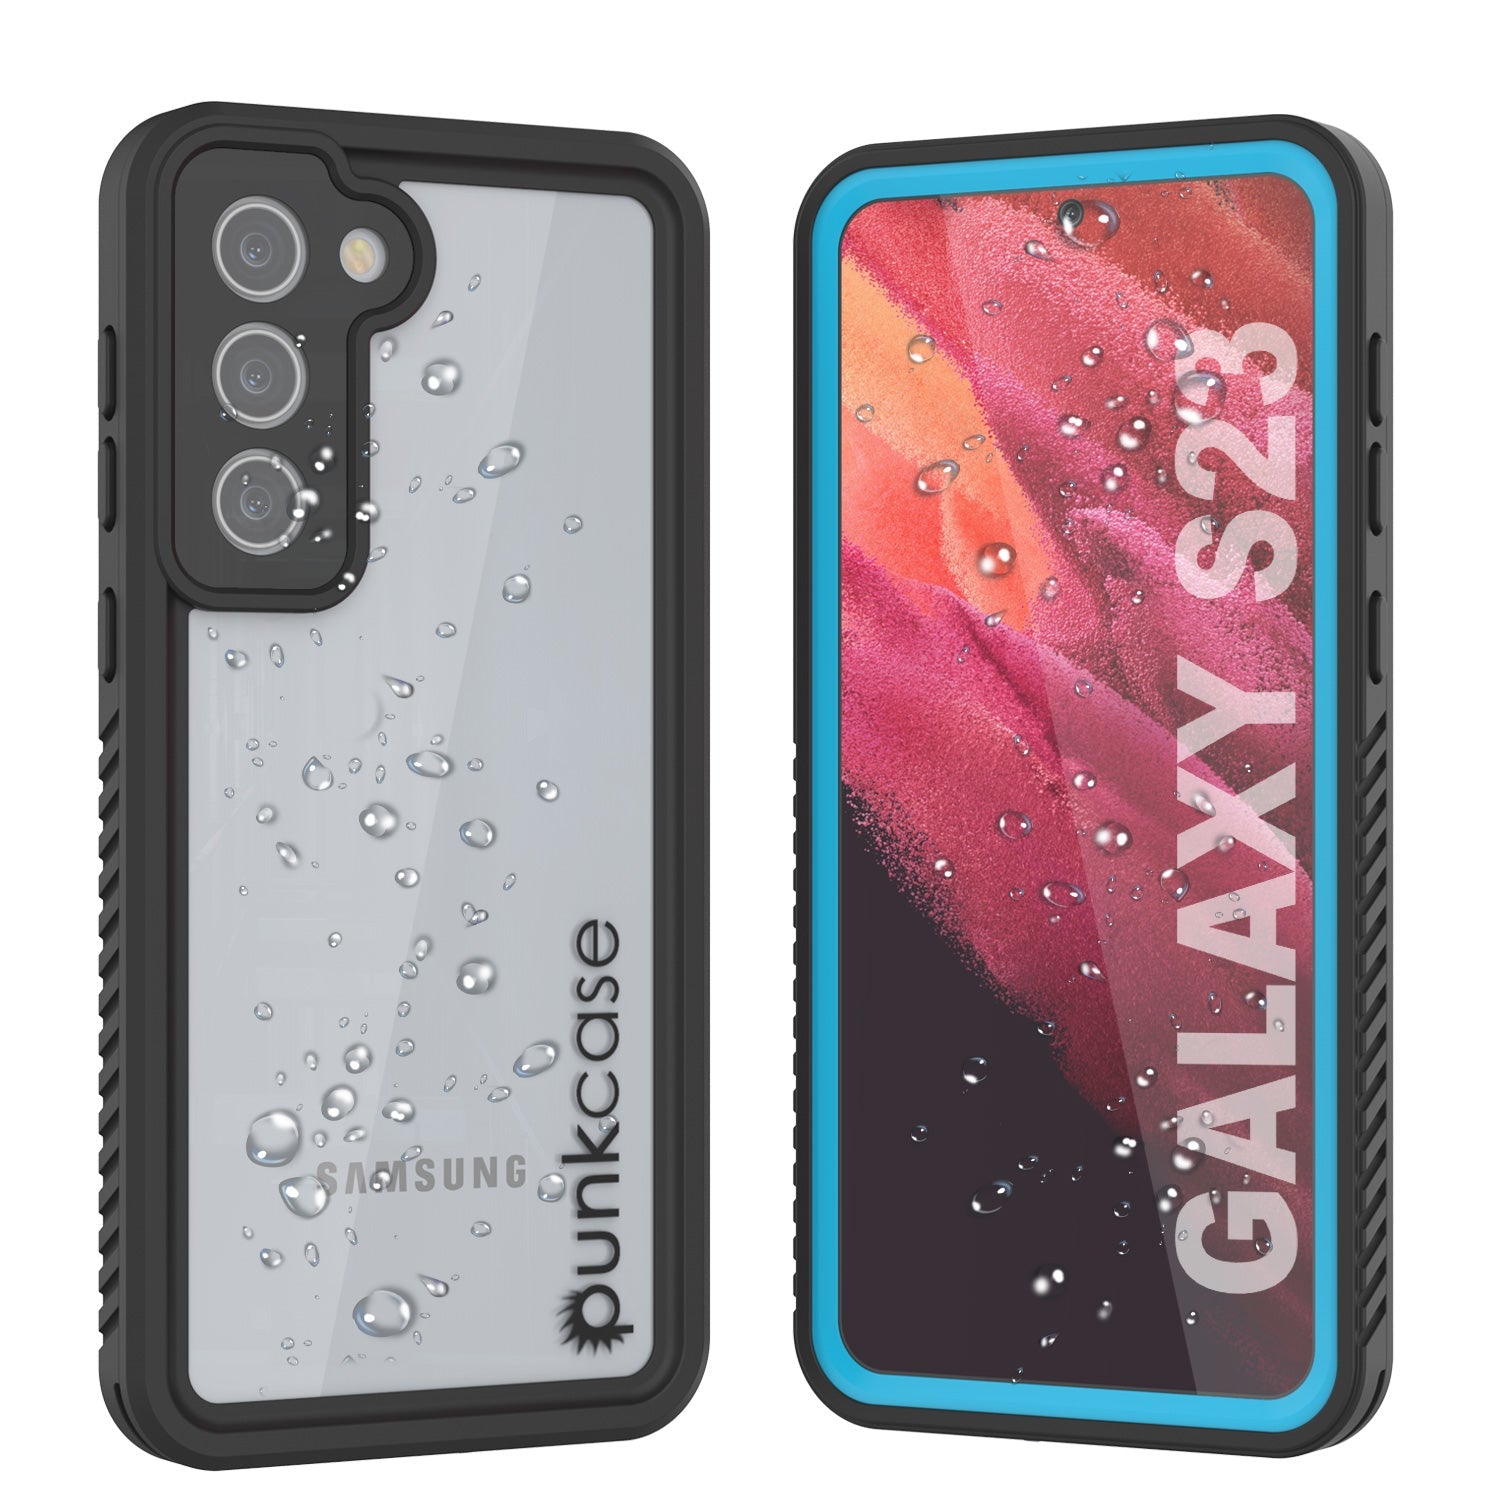 Galaxy S23 Water, Shock, Snow, dirt proof Extreme Series Slim Case Light Blue